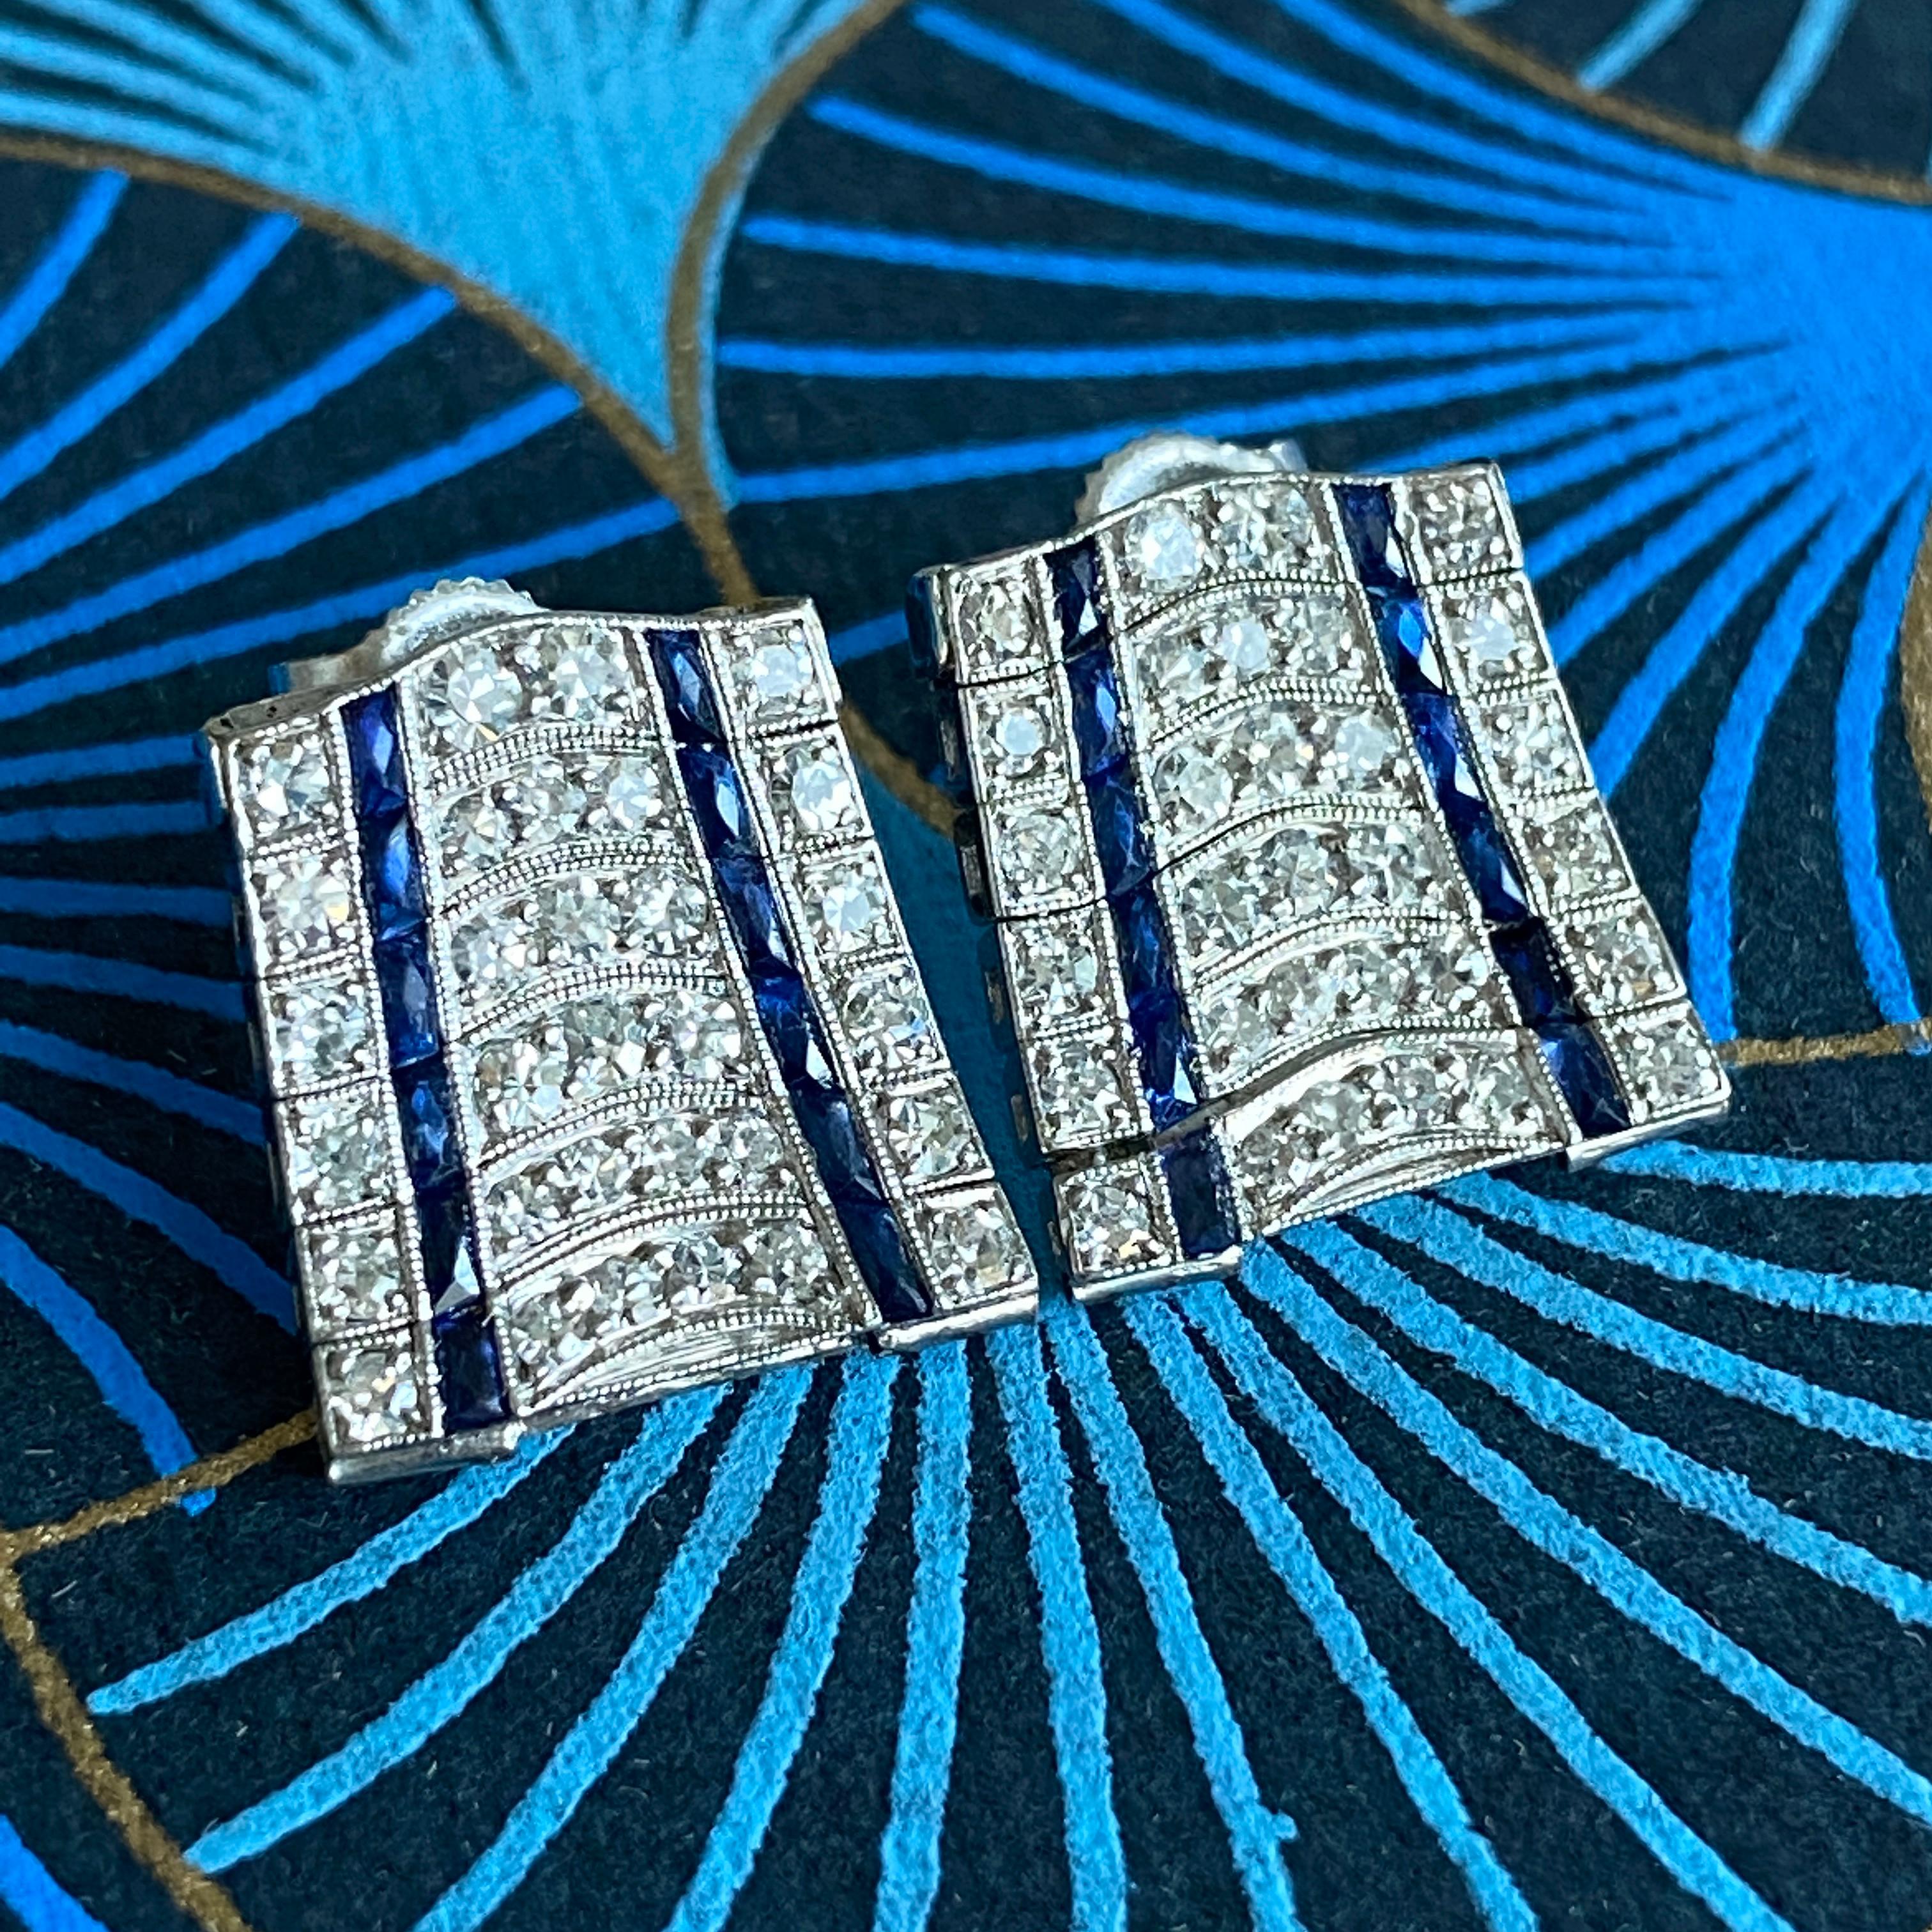 Details:
Fabulous Art Deco Diamond and Sapphire earrings in Platinum. These stunning earrings have 3/4 carat of diamonds and 1/4 carats of sapphires. The earrings are made up of little hinged strips of platinum, they articulate and catch the light